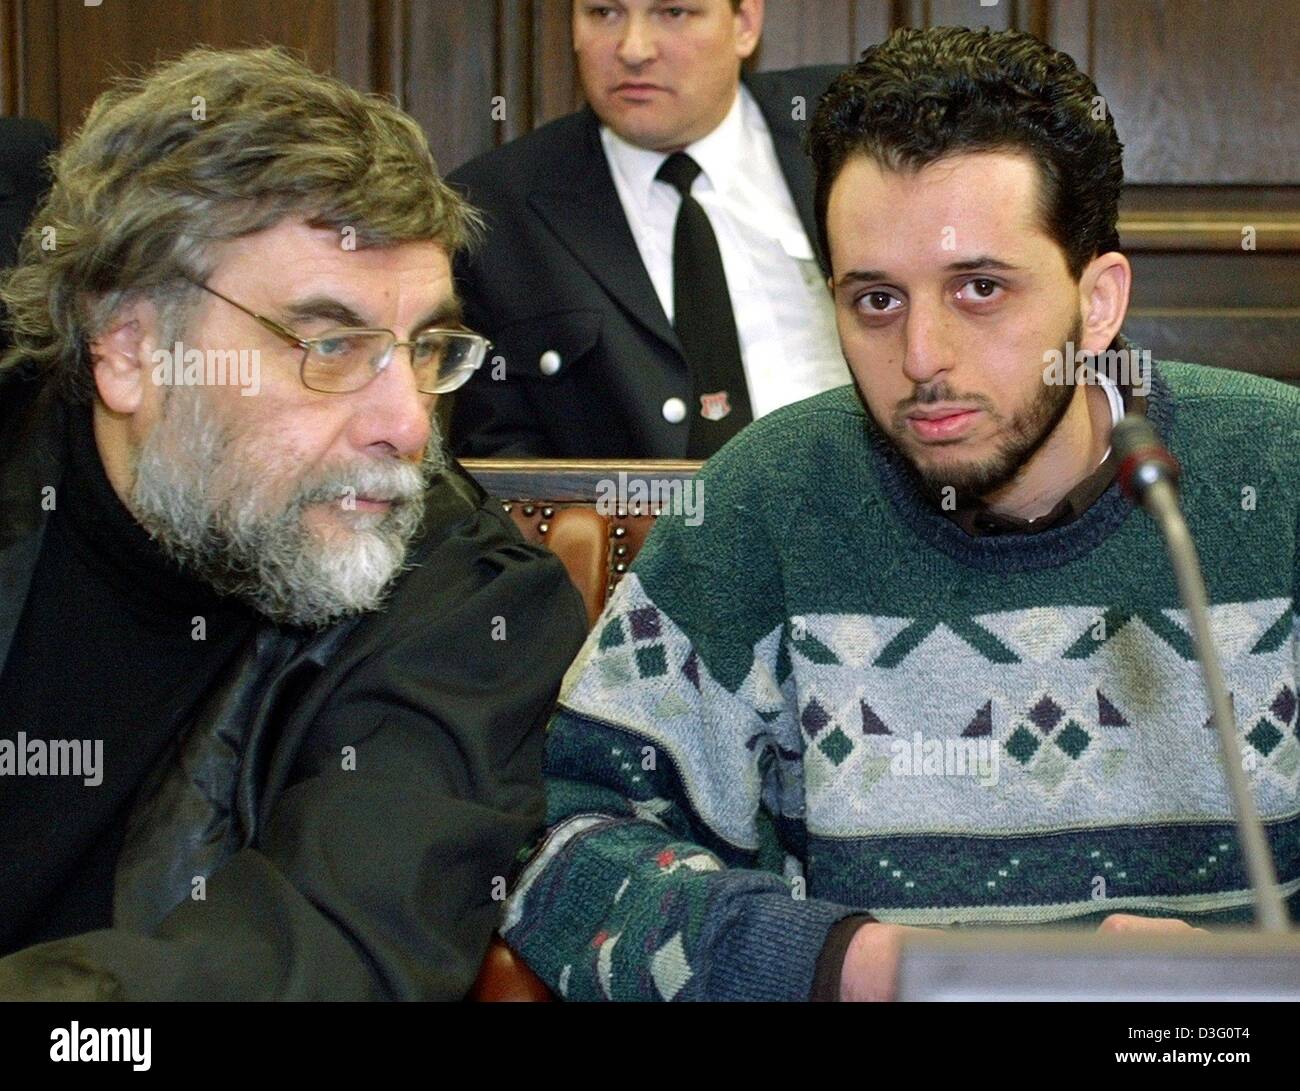 (dpa) - The accused Mounir al-Motassadeq (R) talks to his attorney Hartmut Jacobi in the court room of the regional court in Hamburg, 12 February 2003. The lawyer for Mounir al-Motassadeq, a friend of the 11 September terrorists, slammed the state's evidence 12 February against the Moroccan student as nothing but 'suppositions, allegations and interpretations'. The attorney said th Stock Photo